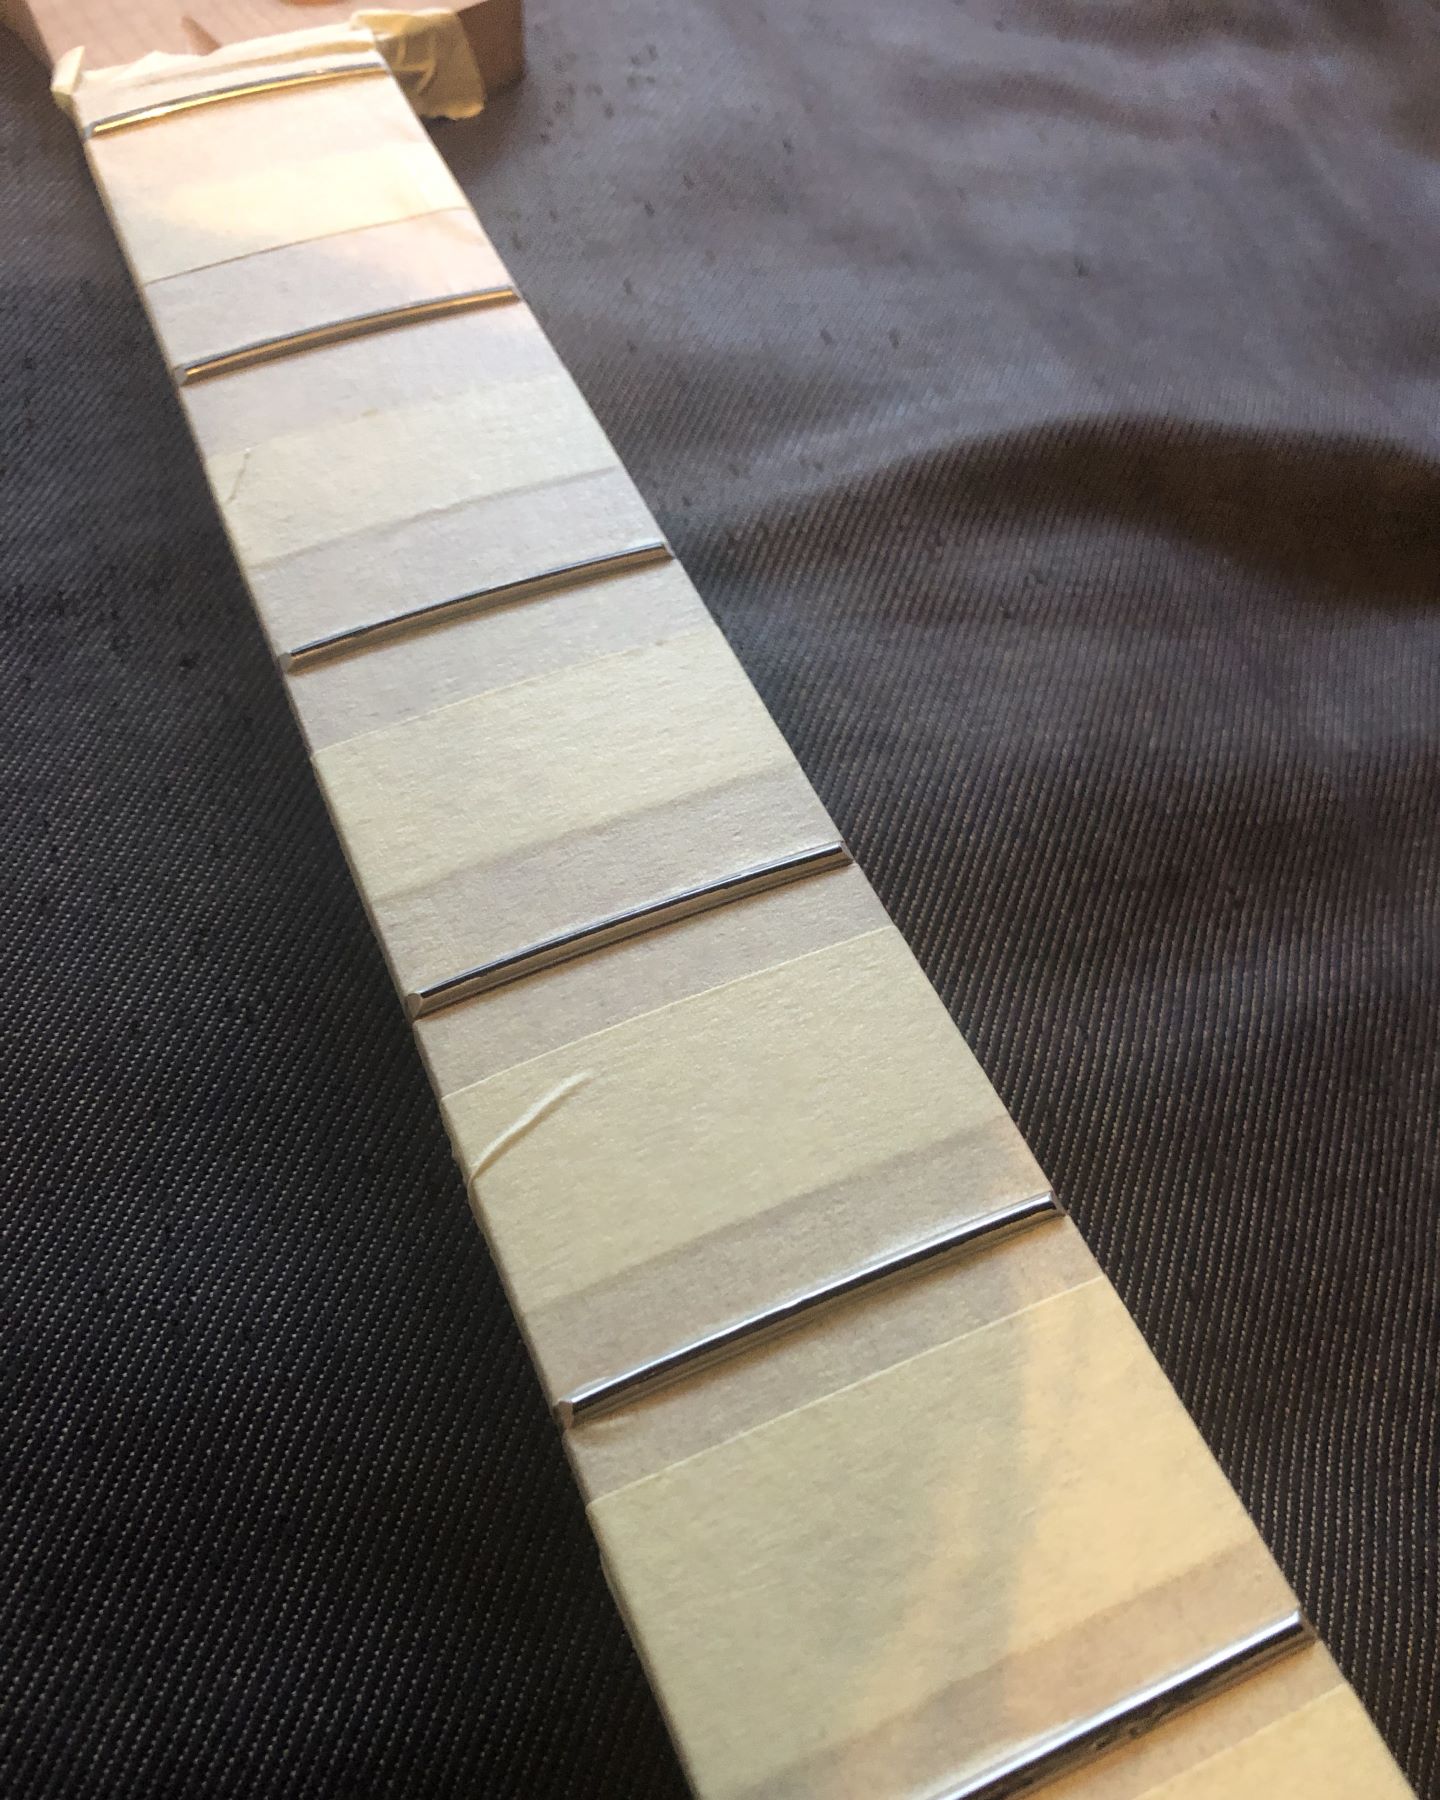 Photo of the middle section of the fretboard of a bass guitar neck covered in masking tape between the frets.